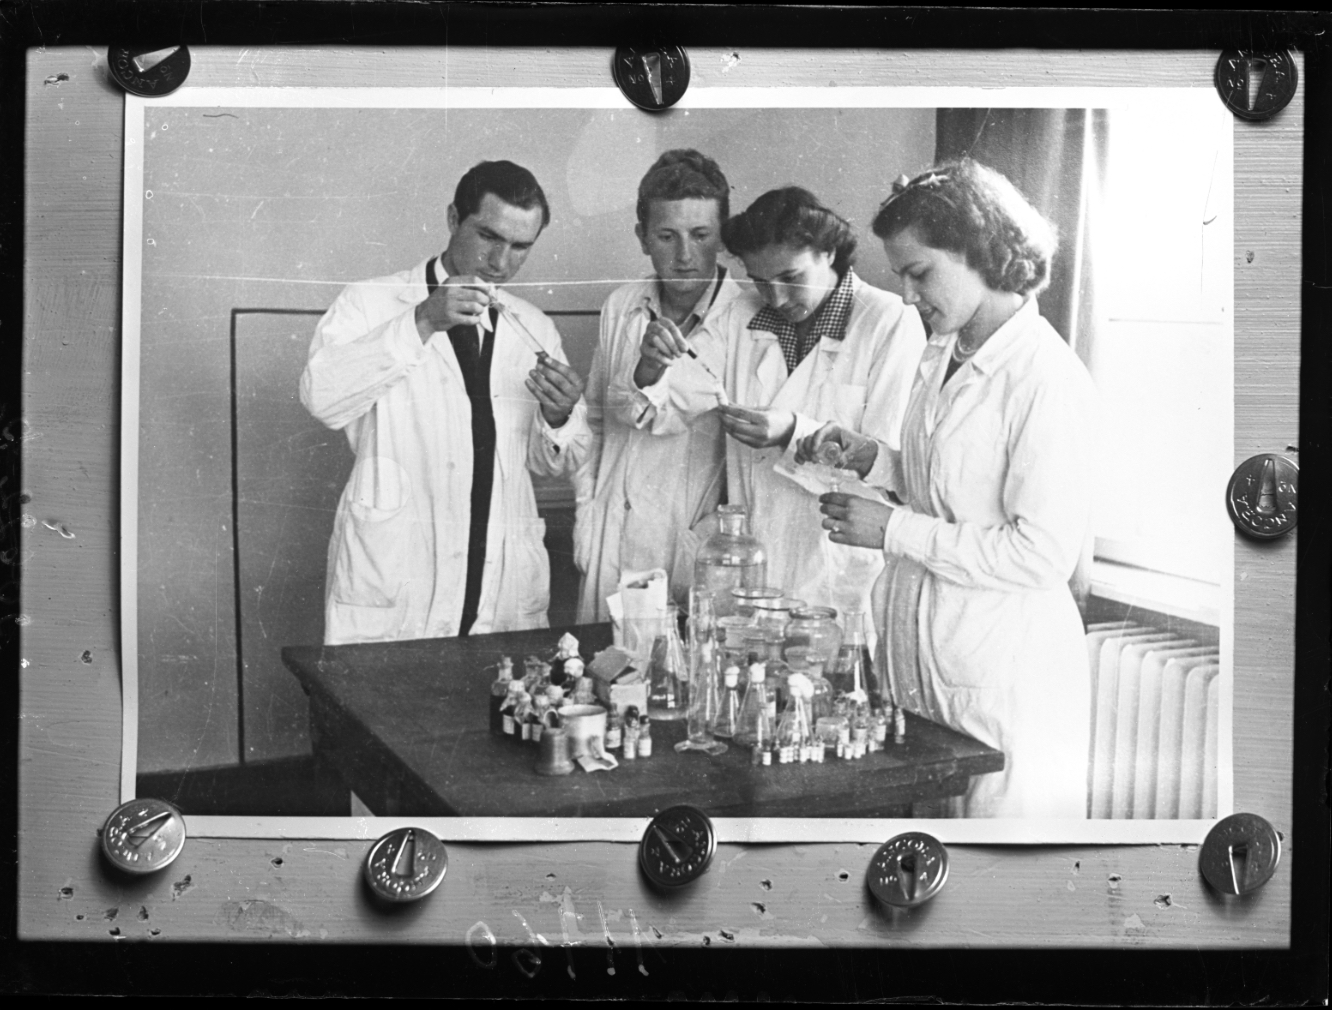 Chemists in 1950-60